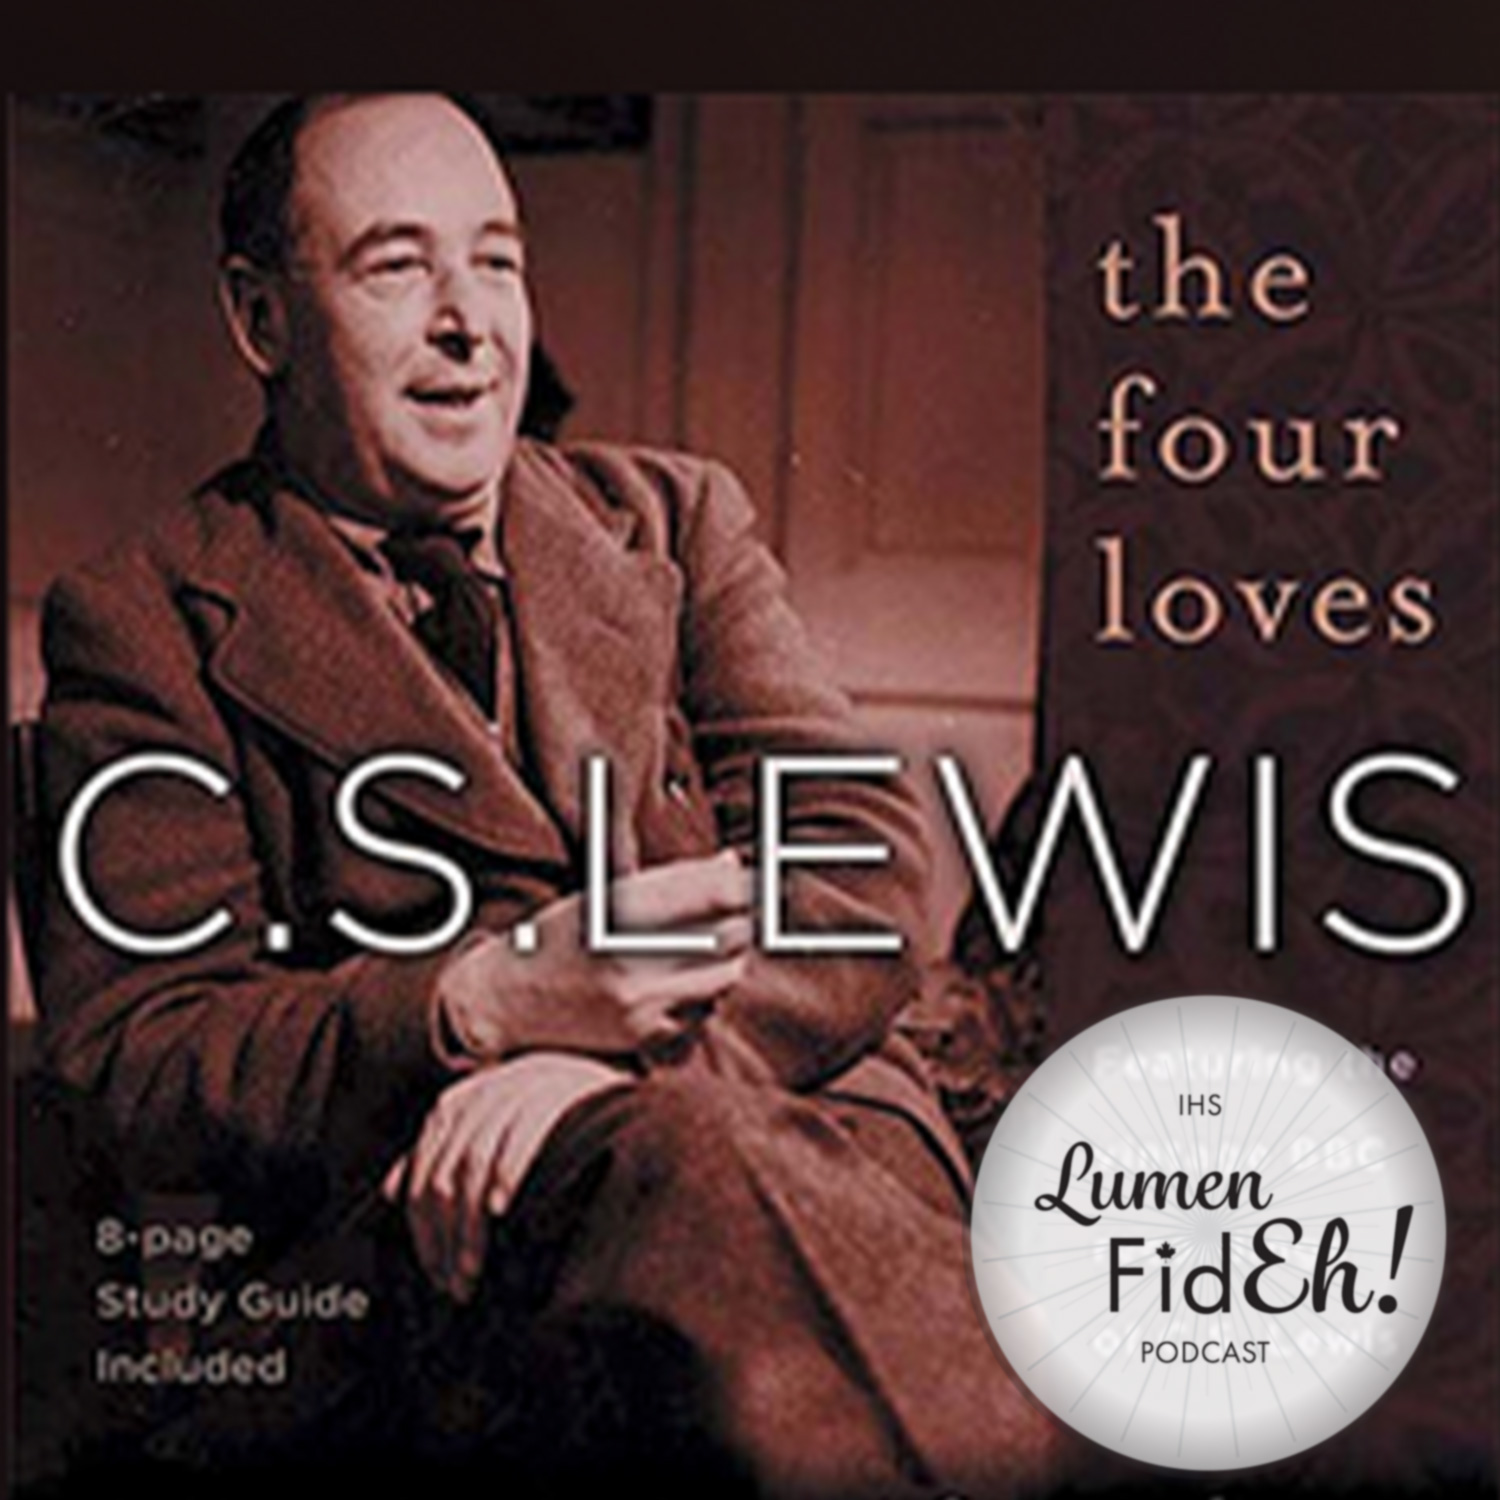 You are currently viewing Four Loves by C.S. Lewis Book Discussion